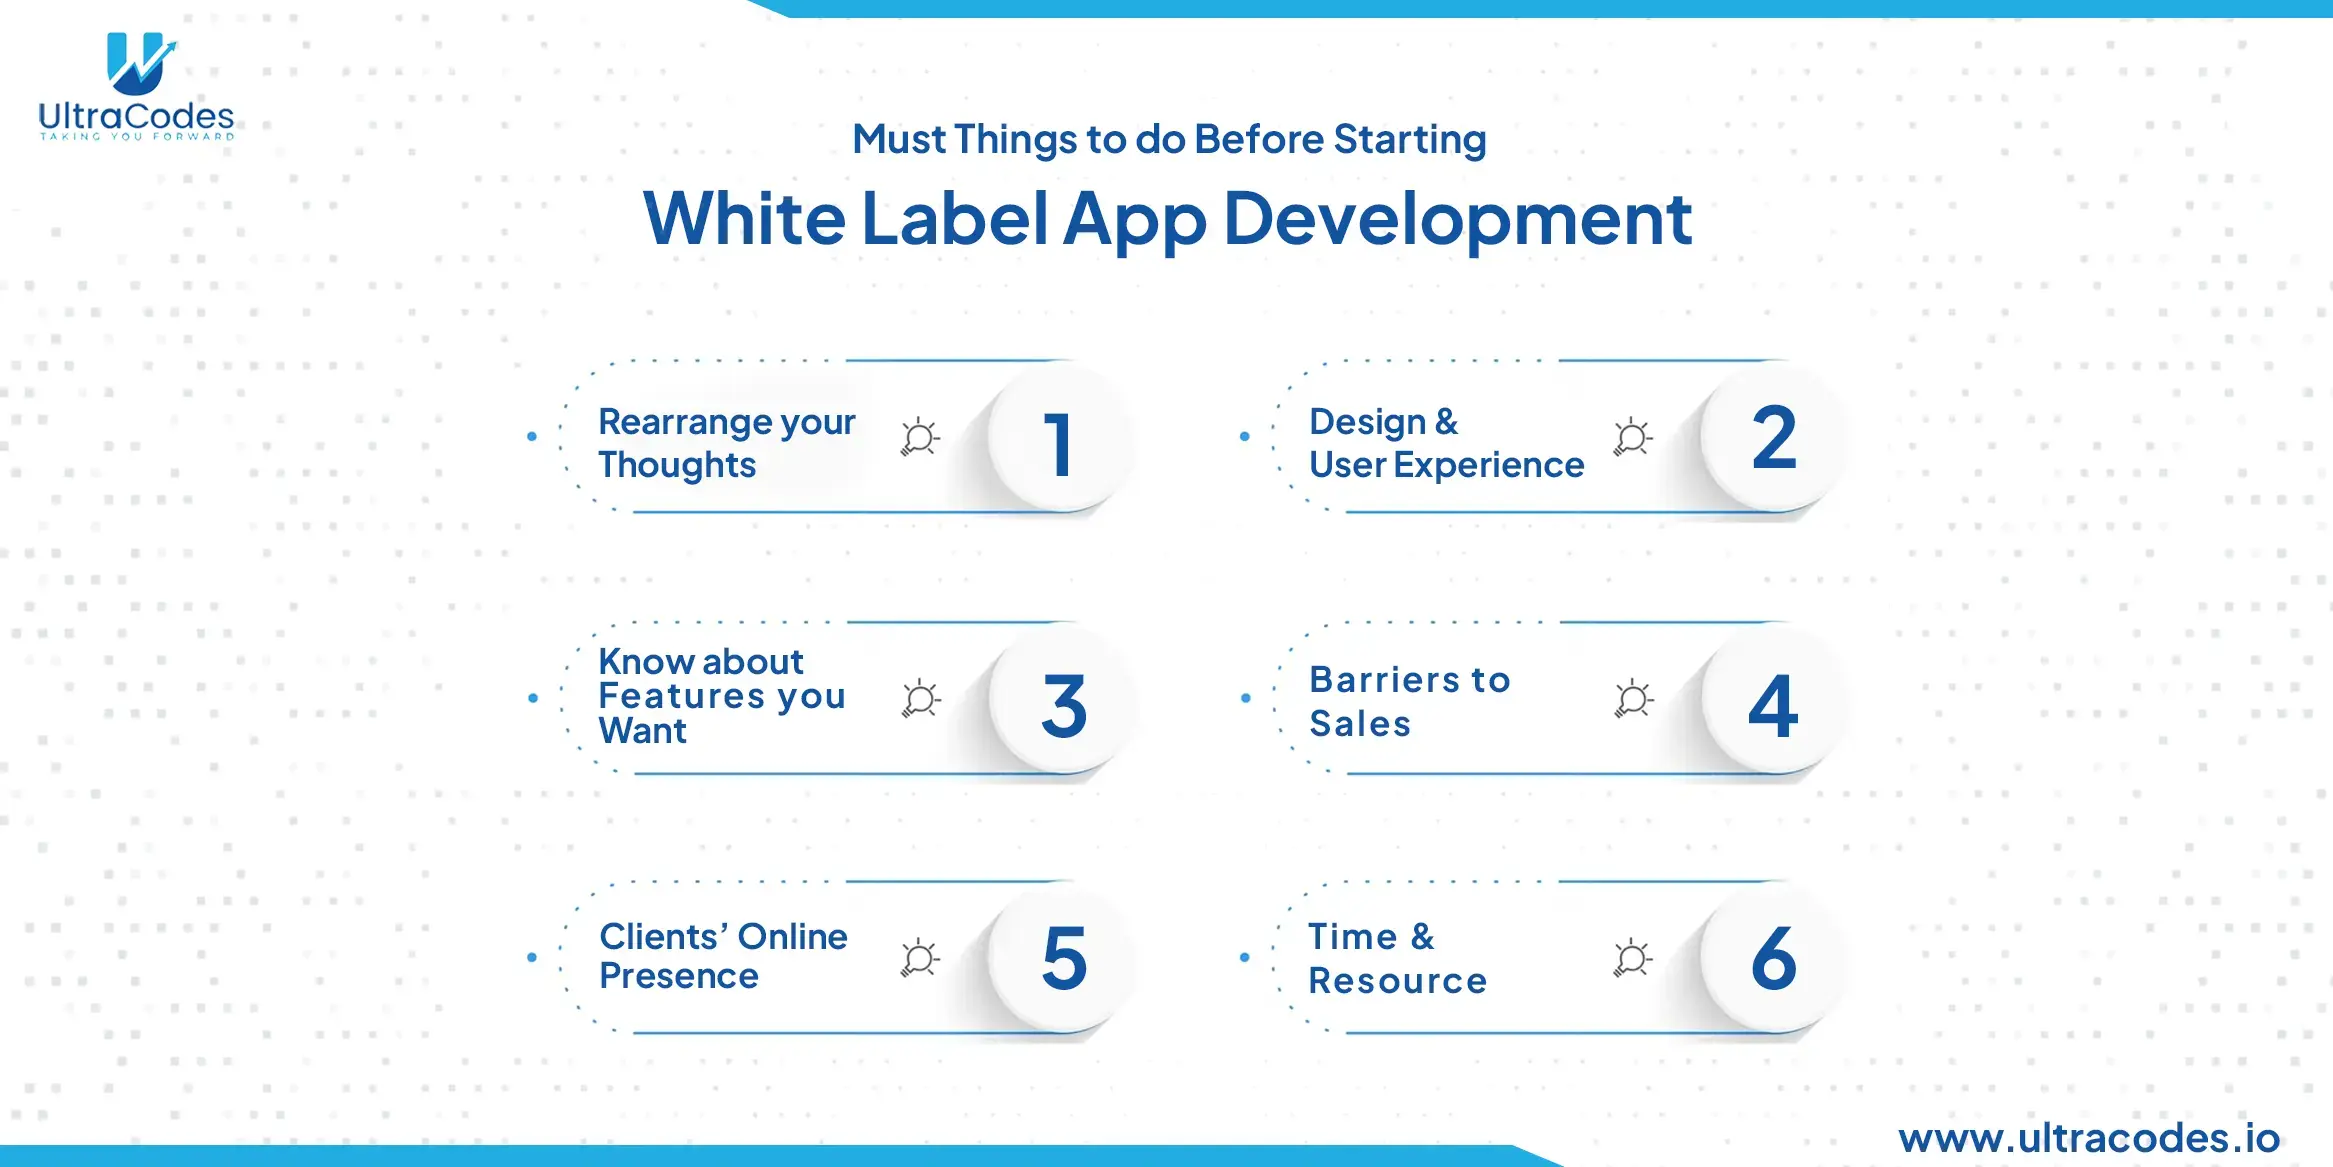 Things to consider before starting white label app development